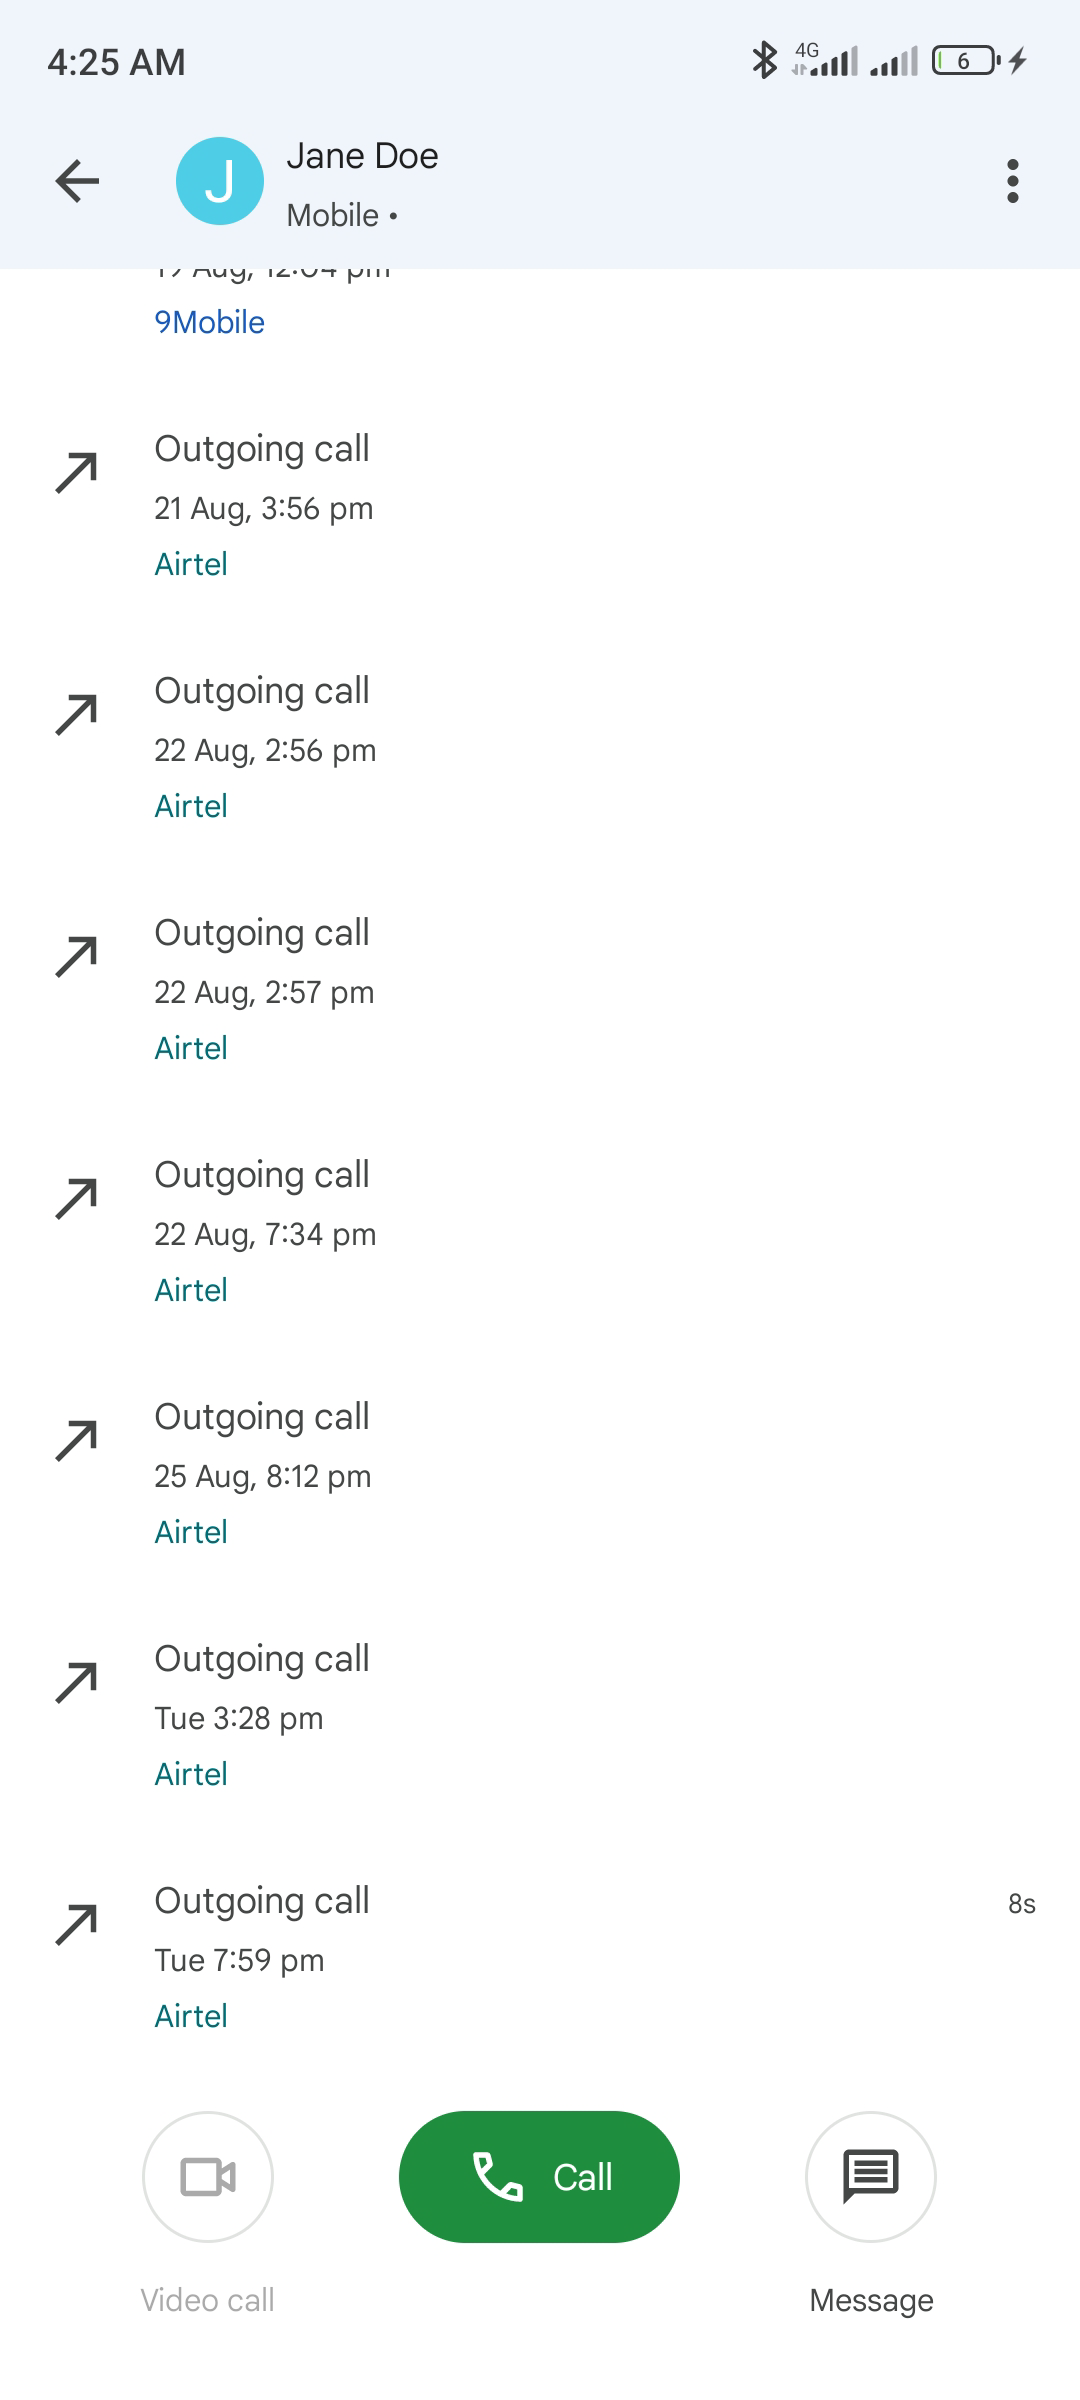 An example of call history for one contact in the Android Phone app.